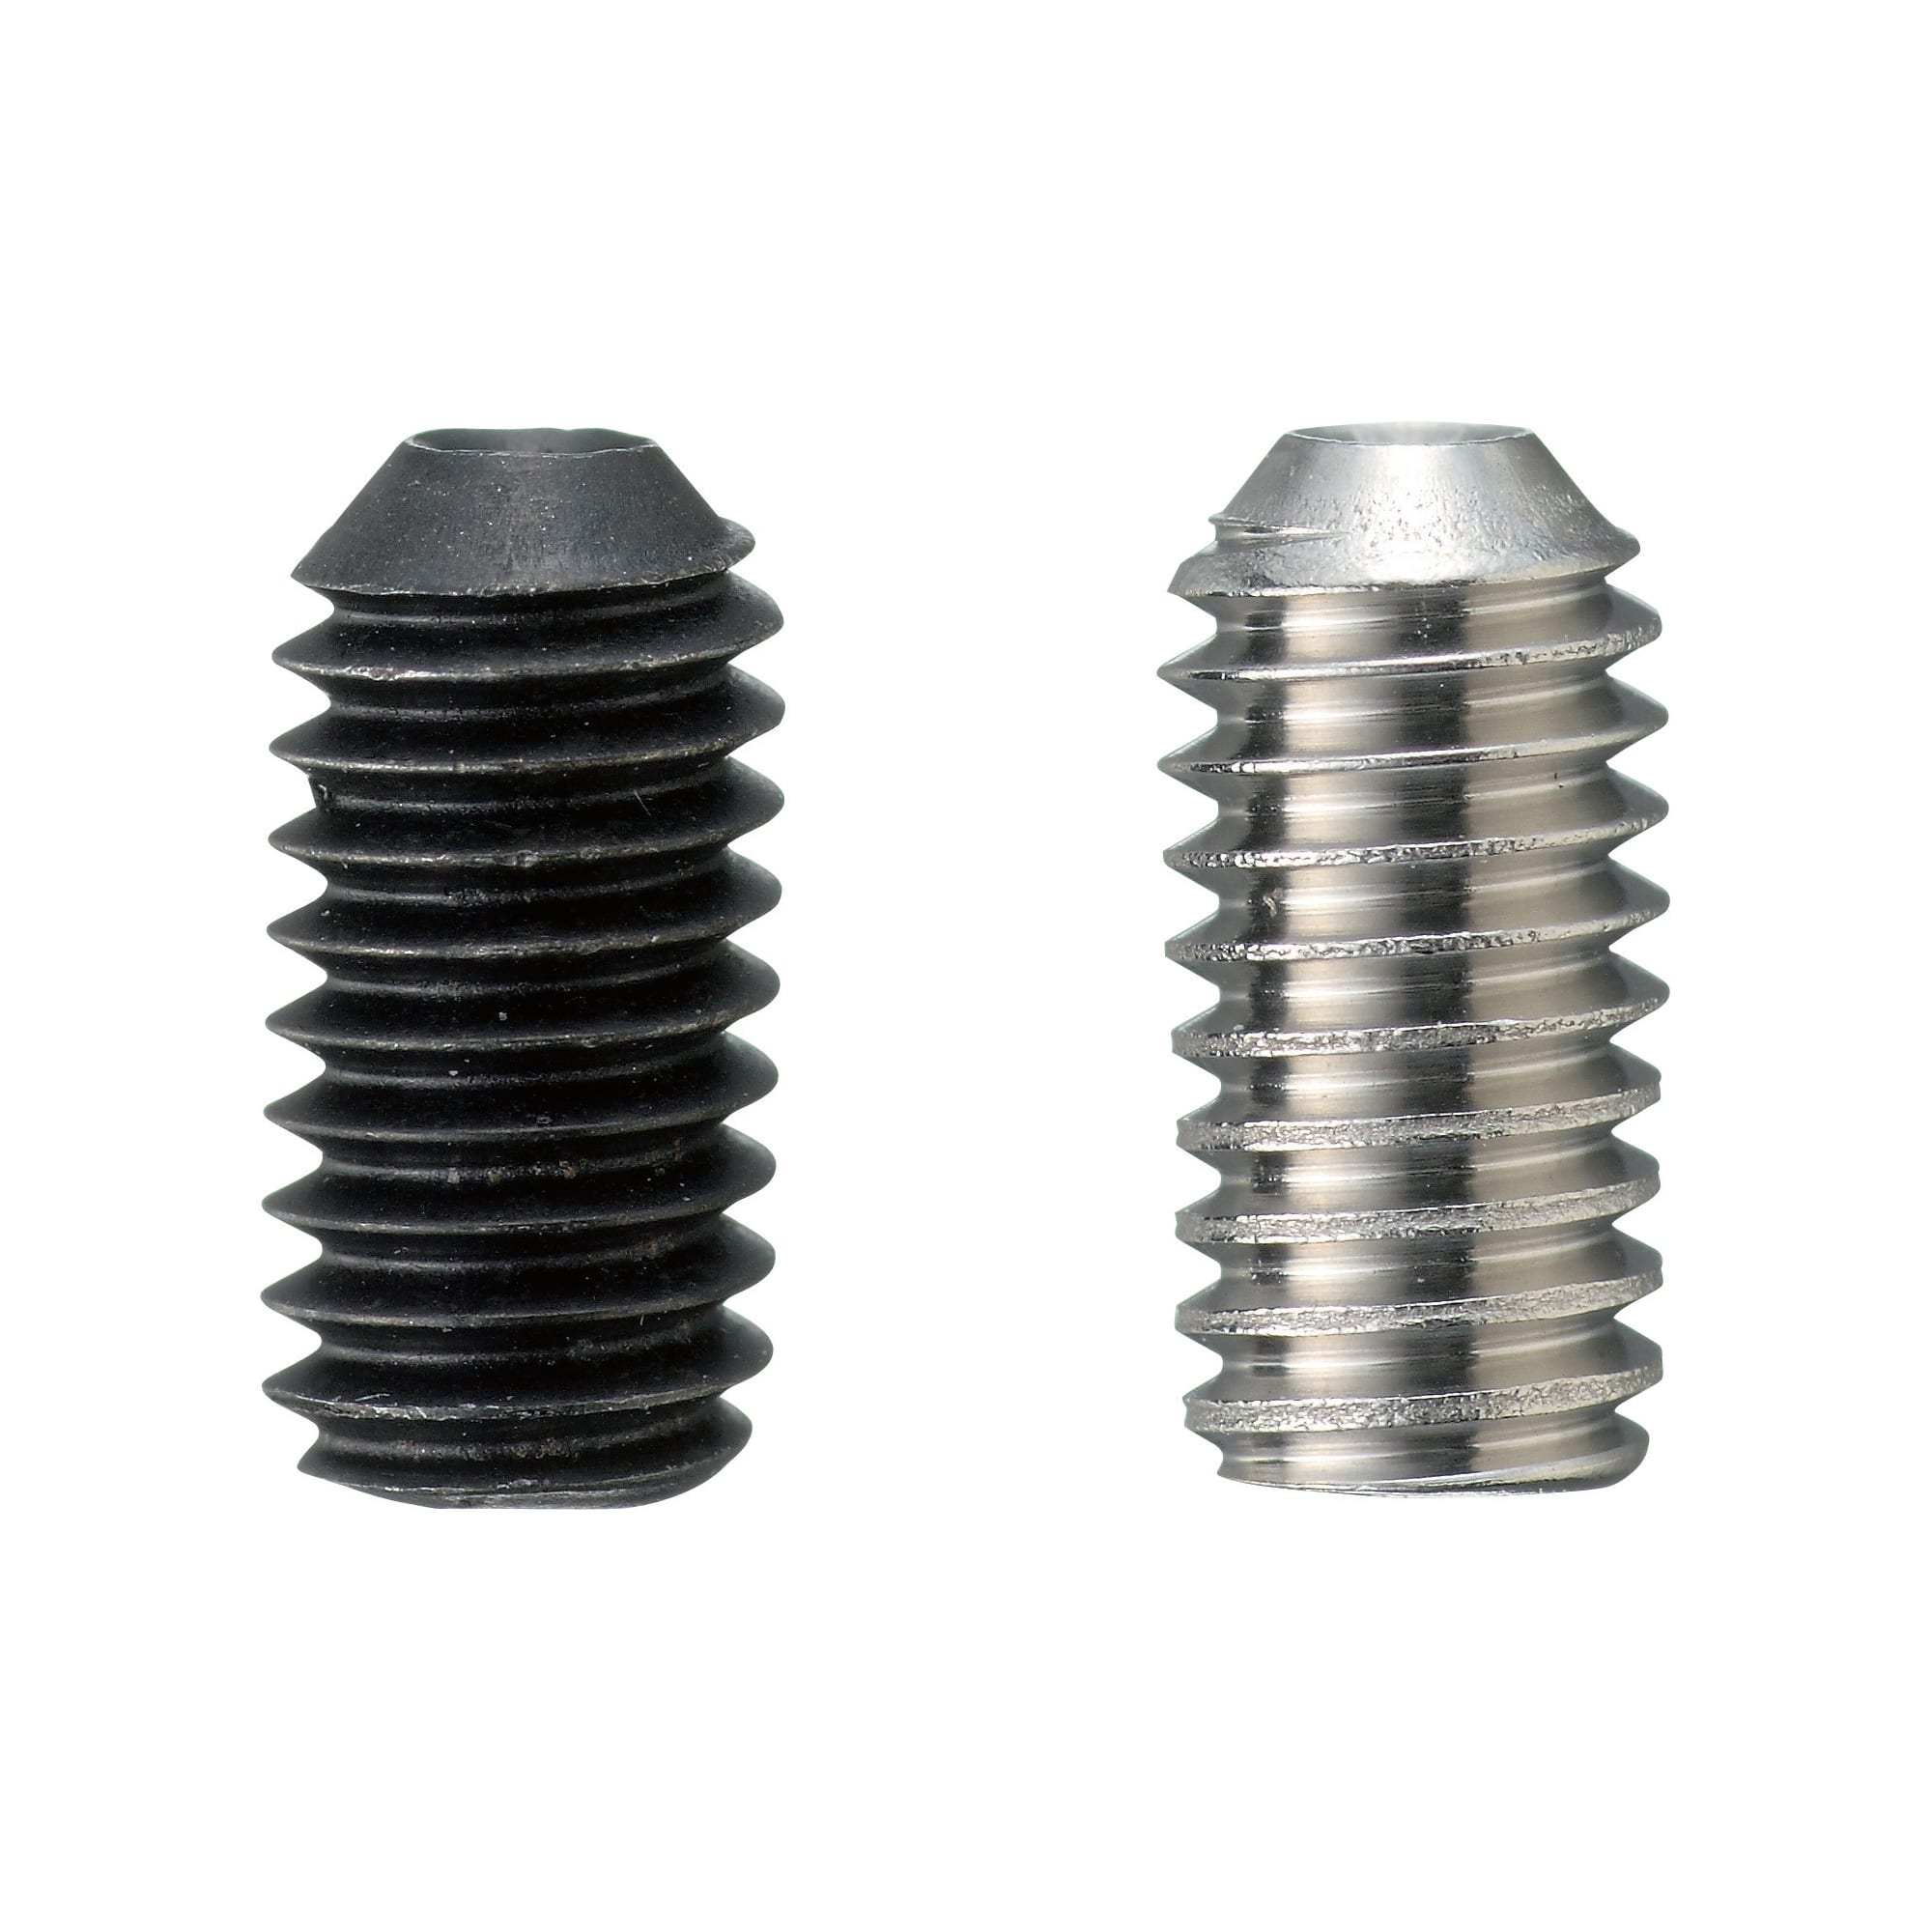 WN 913.3 Inch Size, Steel Set Screws, with Brass or Plastic Tip